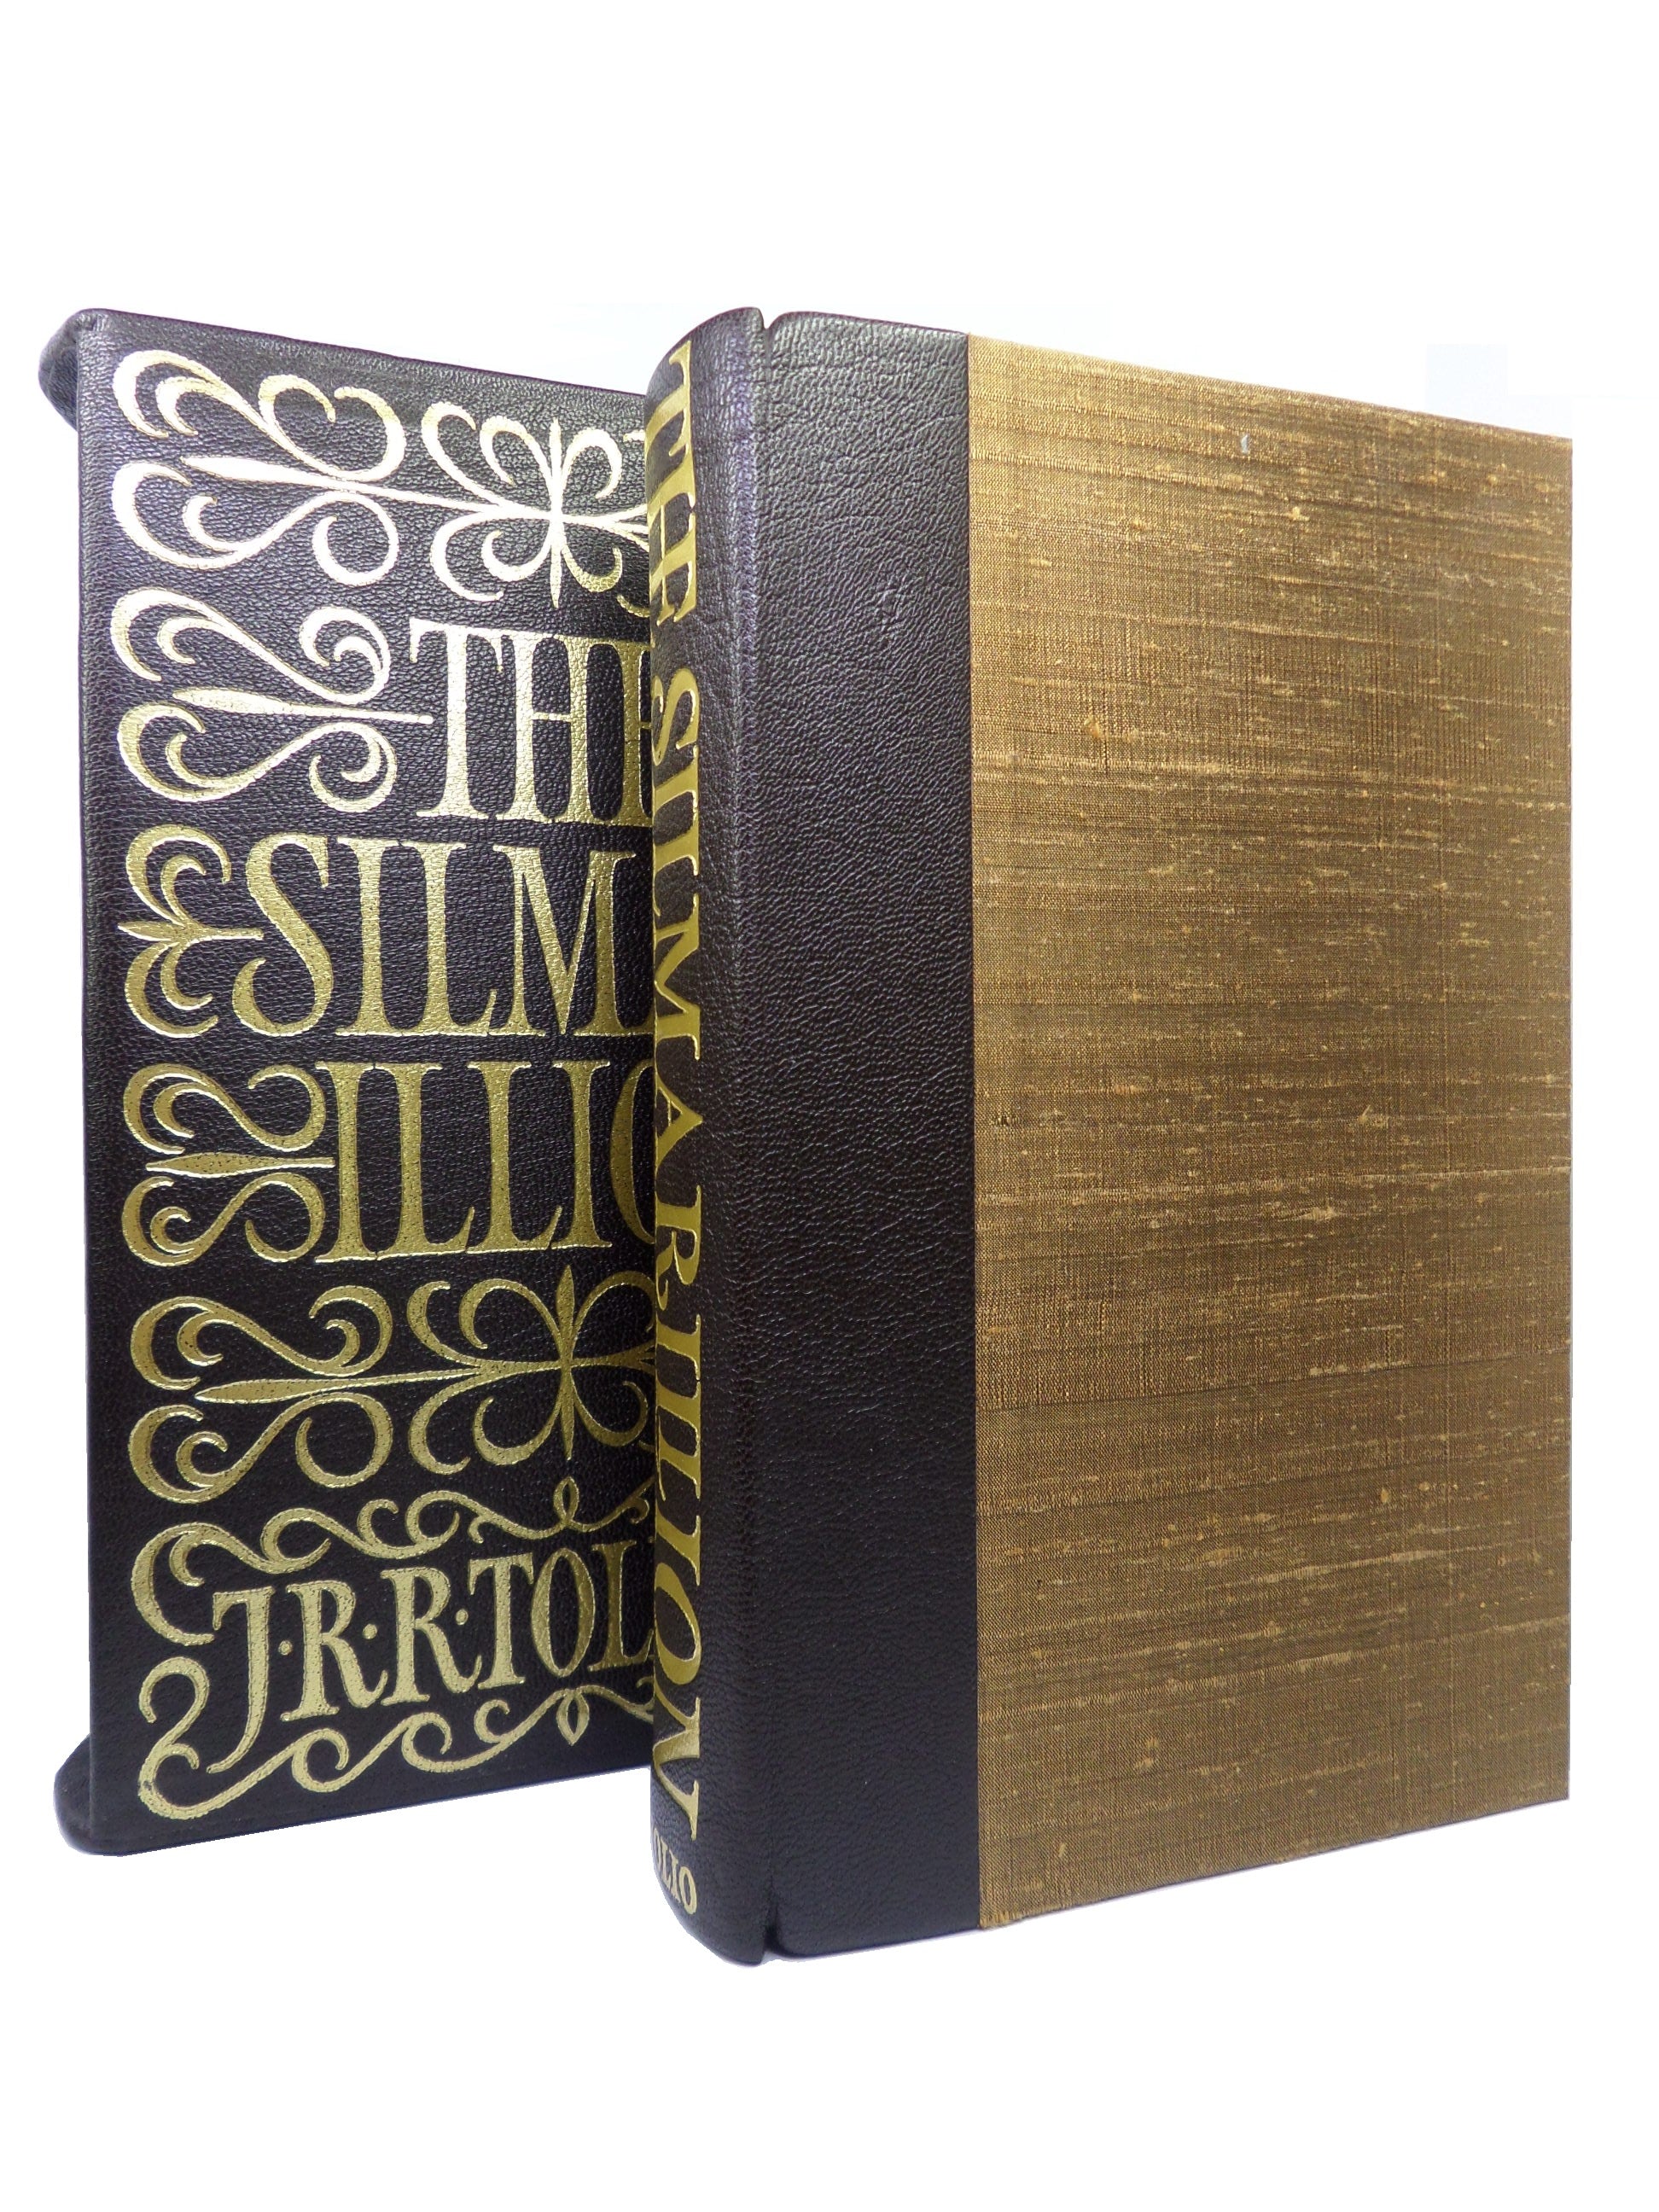 THE SILMARILLION BY J.R.R. TOLKIEN 2003 FOLIO SOCIETY DELUXE EDITION